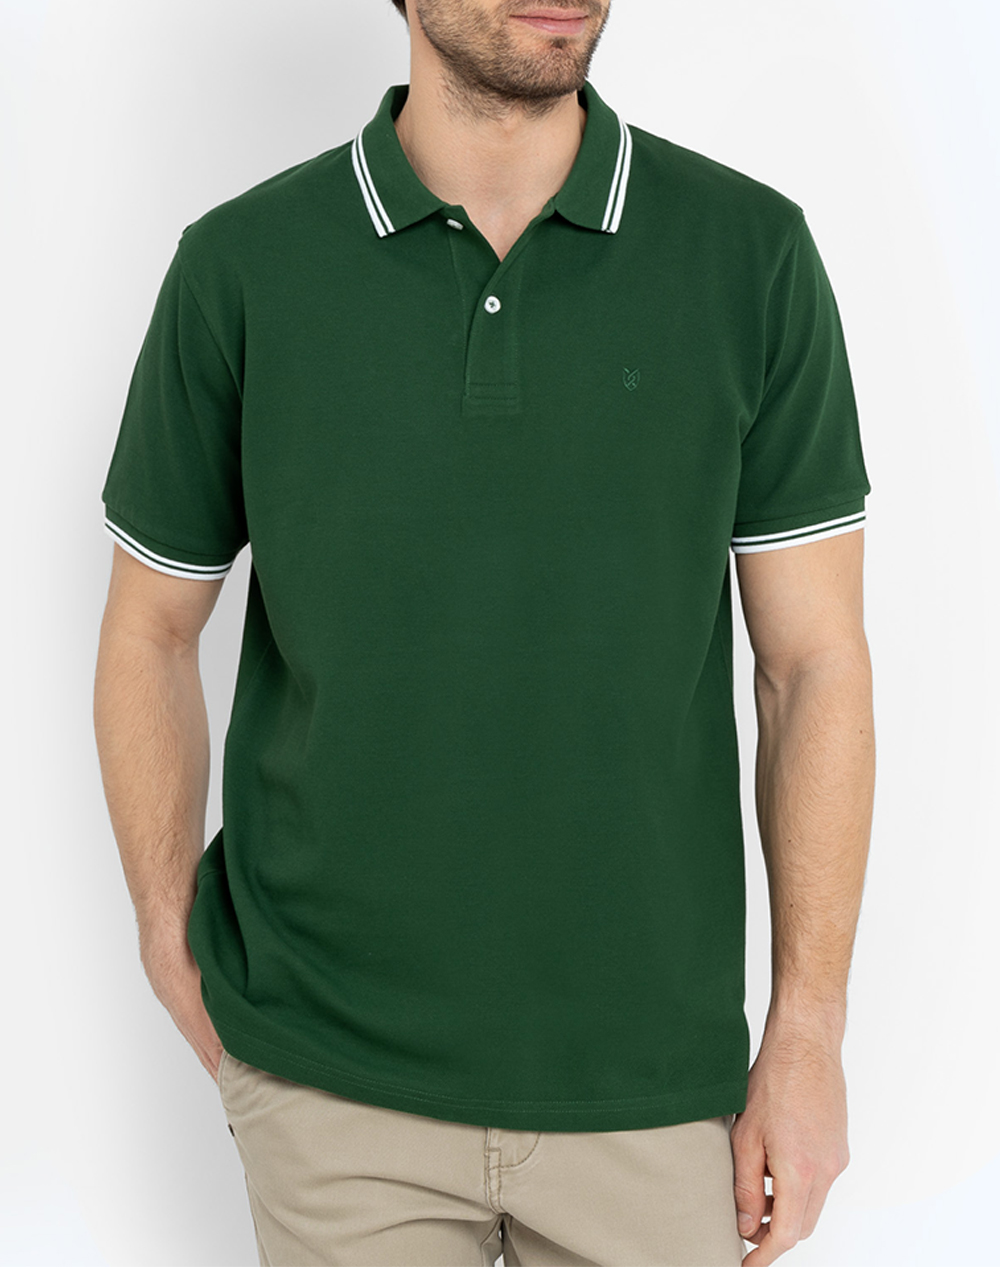 THE BOSTONIANS ΜΠΛΟΥΖΑ POLO PIQUE TWIN TIPPED REGULAR 3PS1271-BOSTON Green 3820ABOST3410093_XR30396